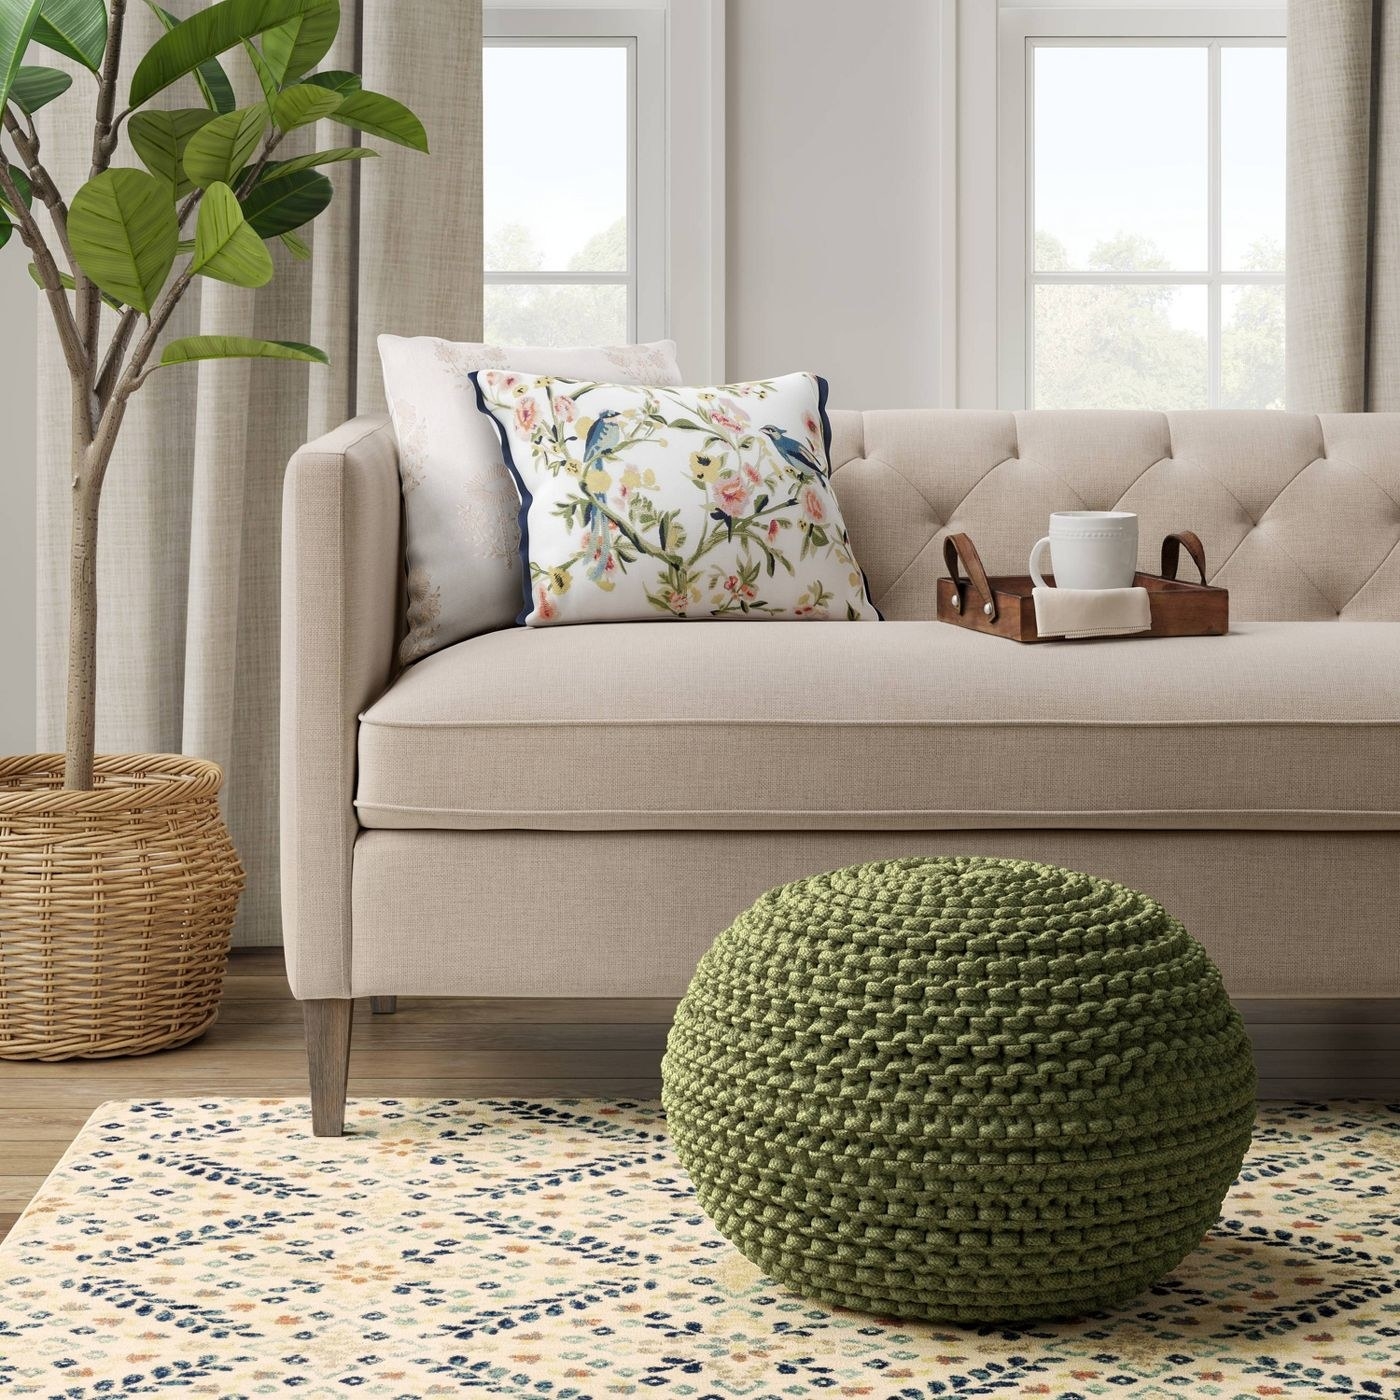 A green knit pouf in front of a sofa